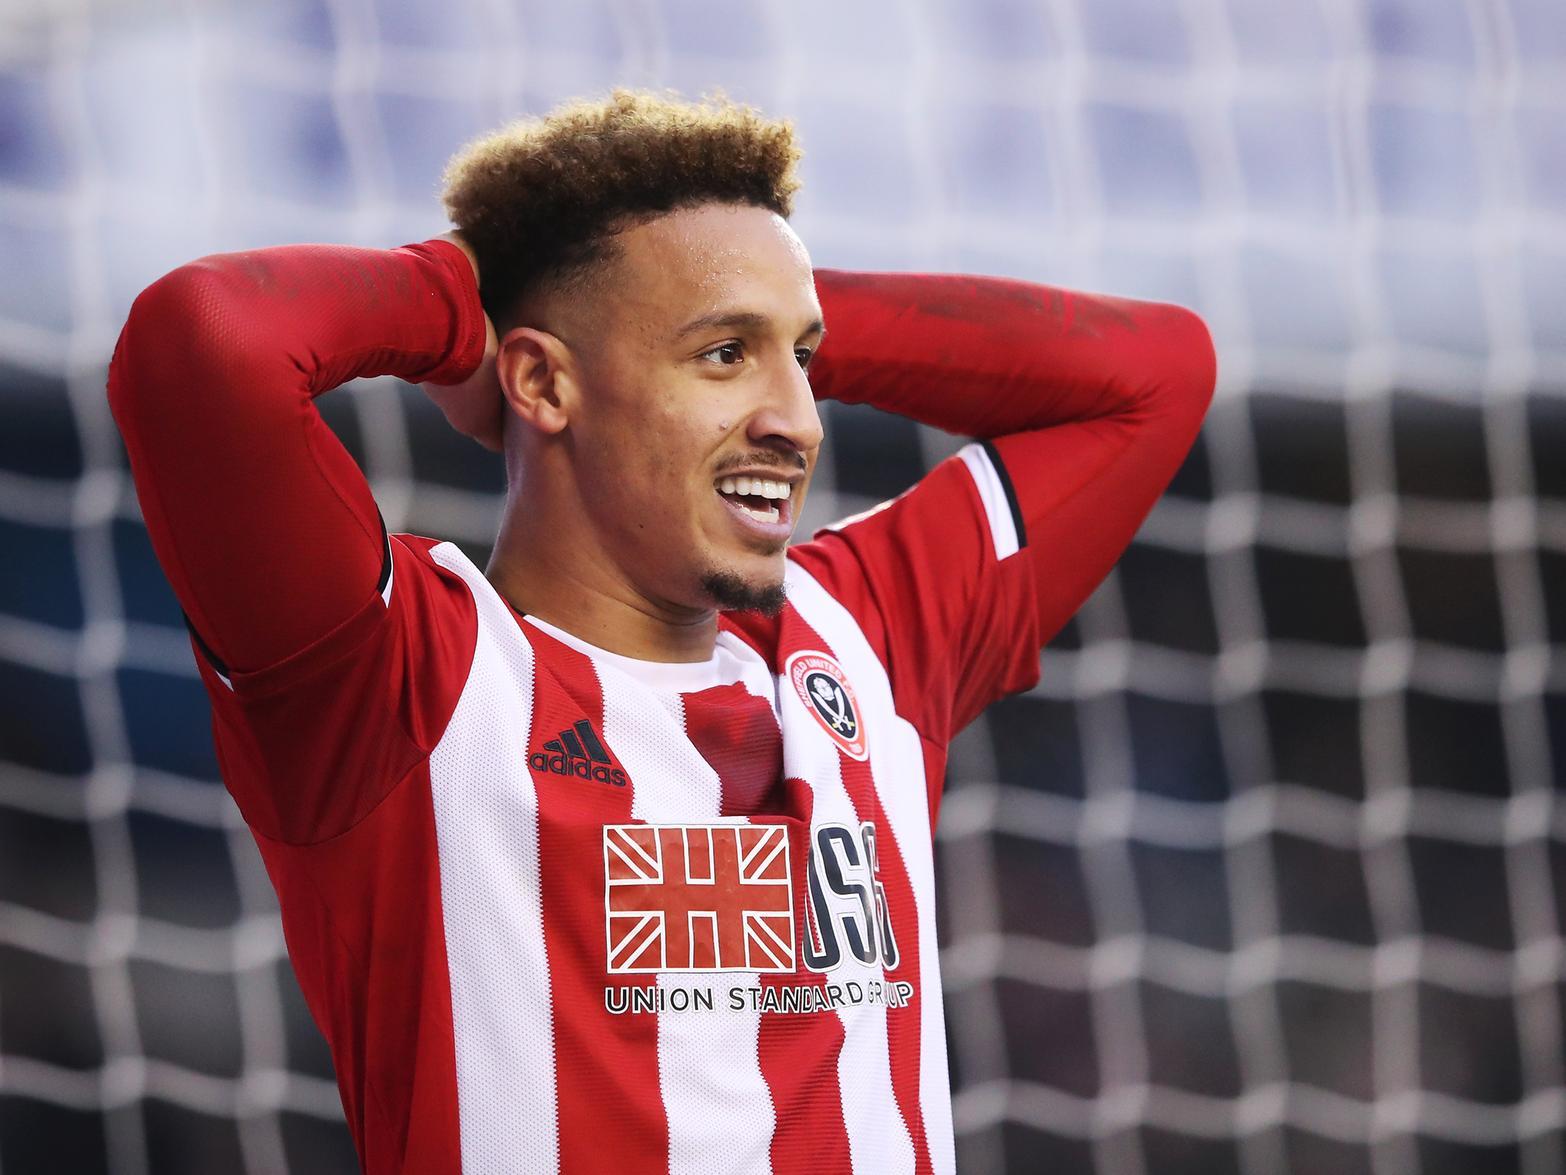 Former Preston North End star Callum Robinson is being lined up by West Bromwich Albion, who are looking to launcha move for the out of favour Sheffield United forward. (The Sun)